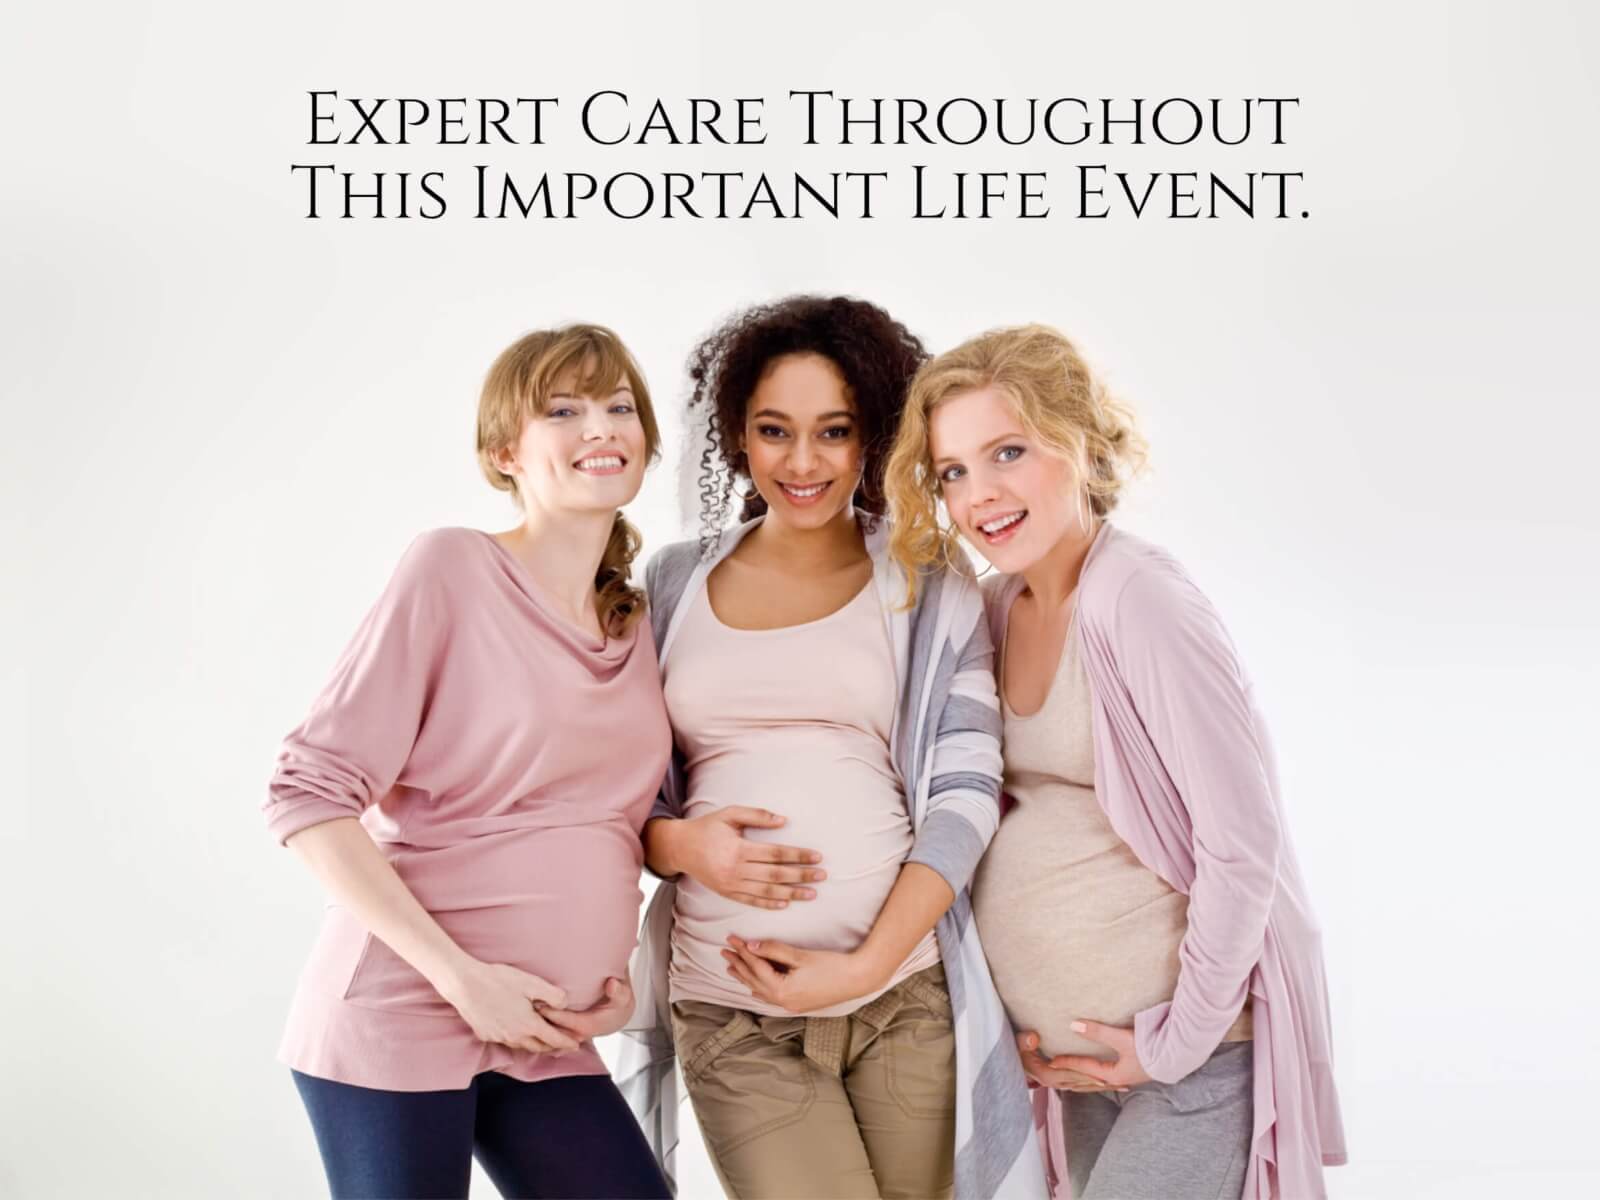 Expert Care Throughout This Important Life Event.